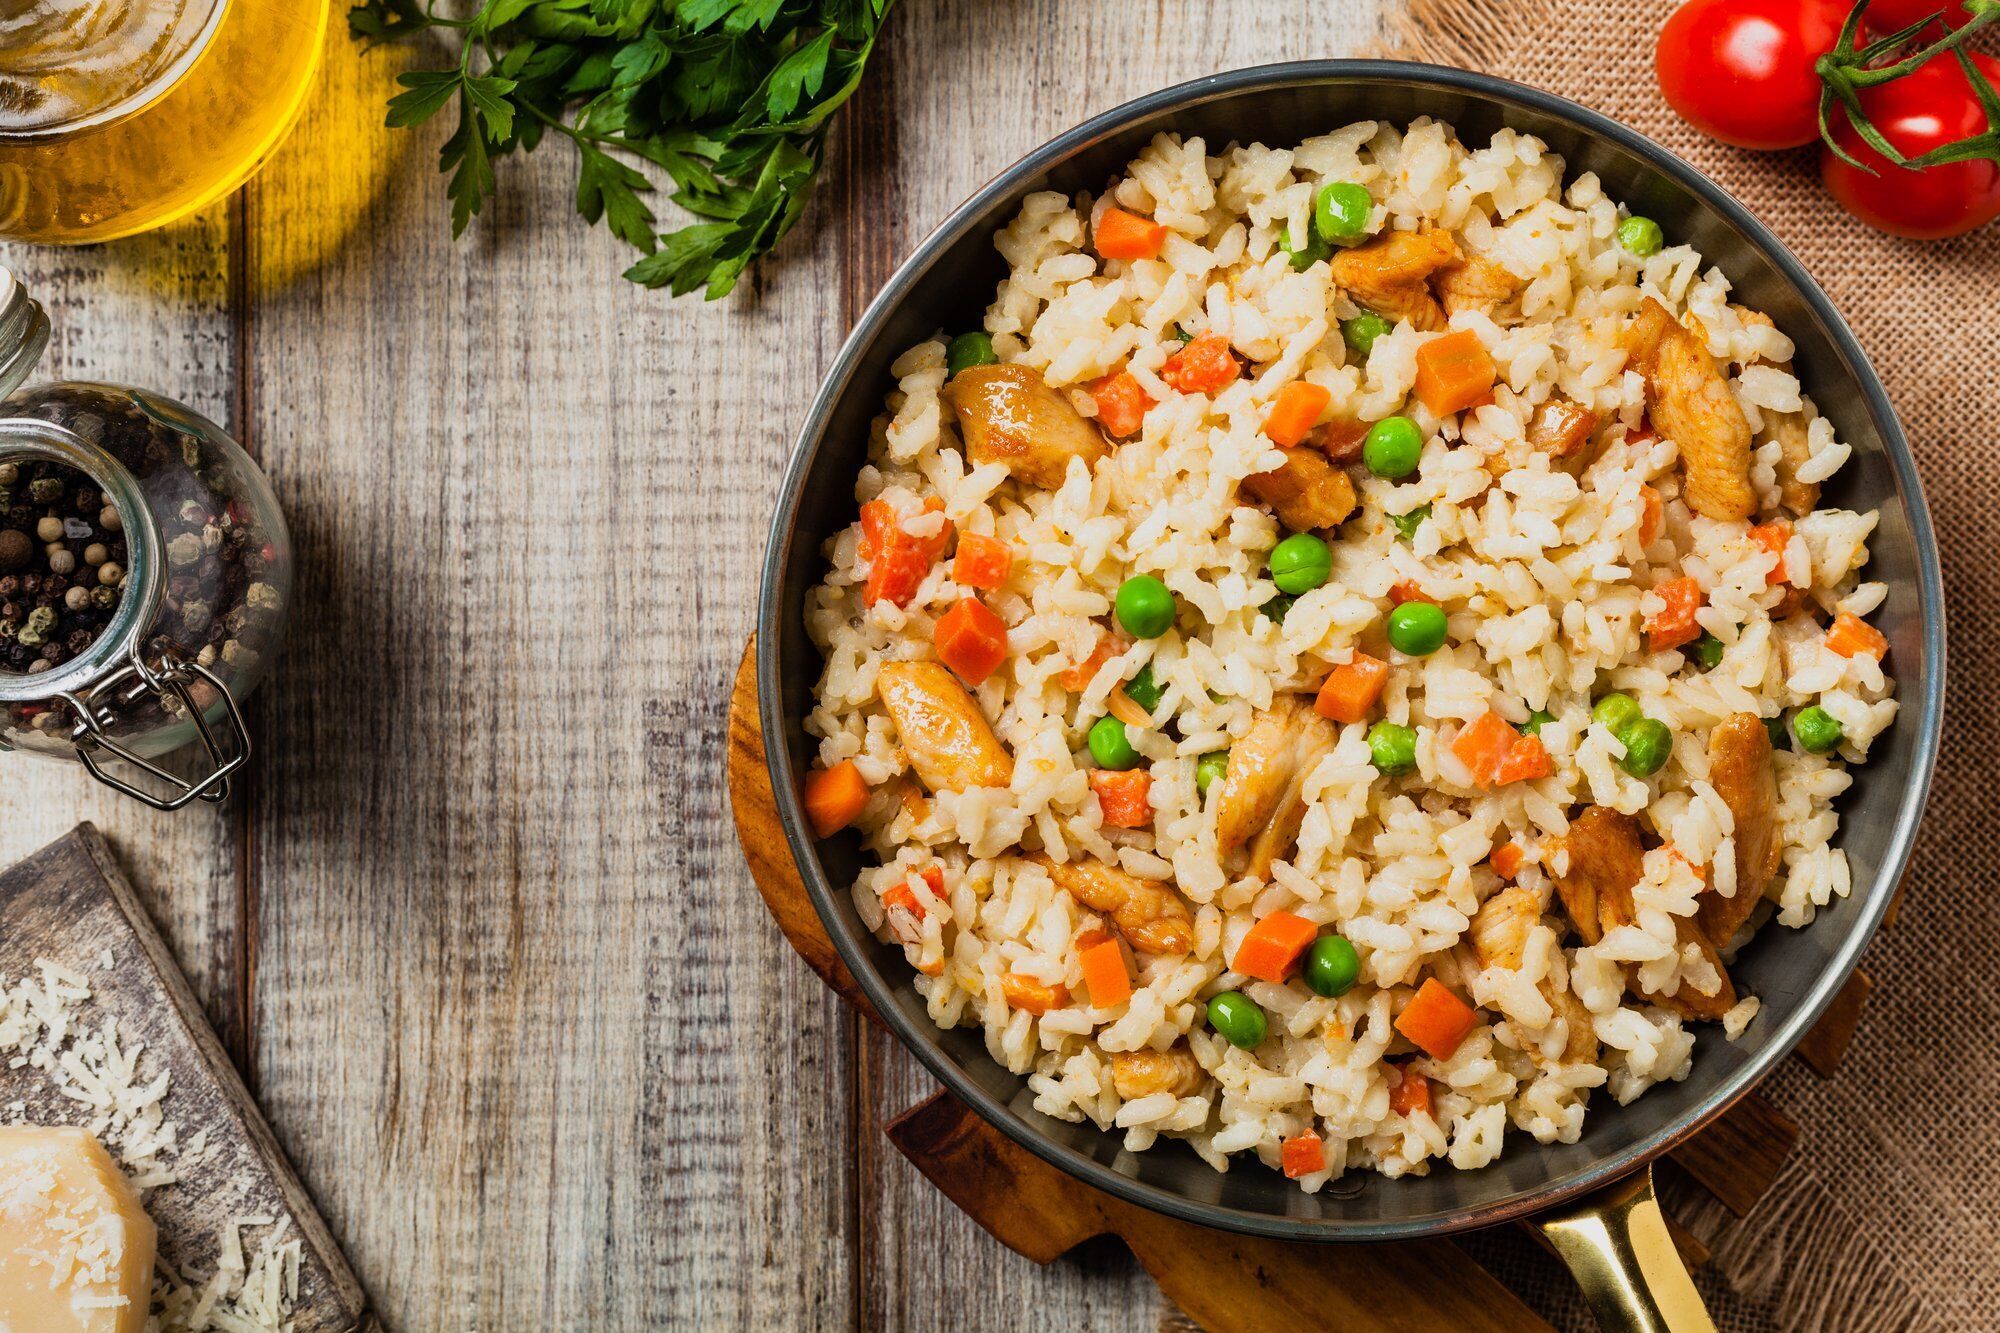 How to cook rice correctly to make it tasty and not stick together: effective tips